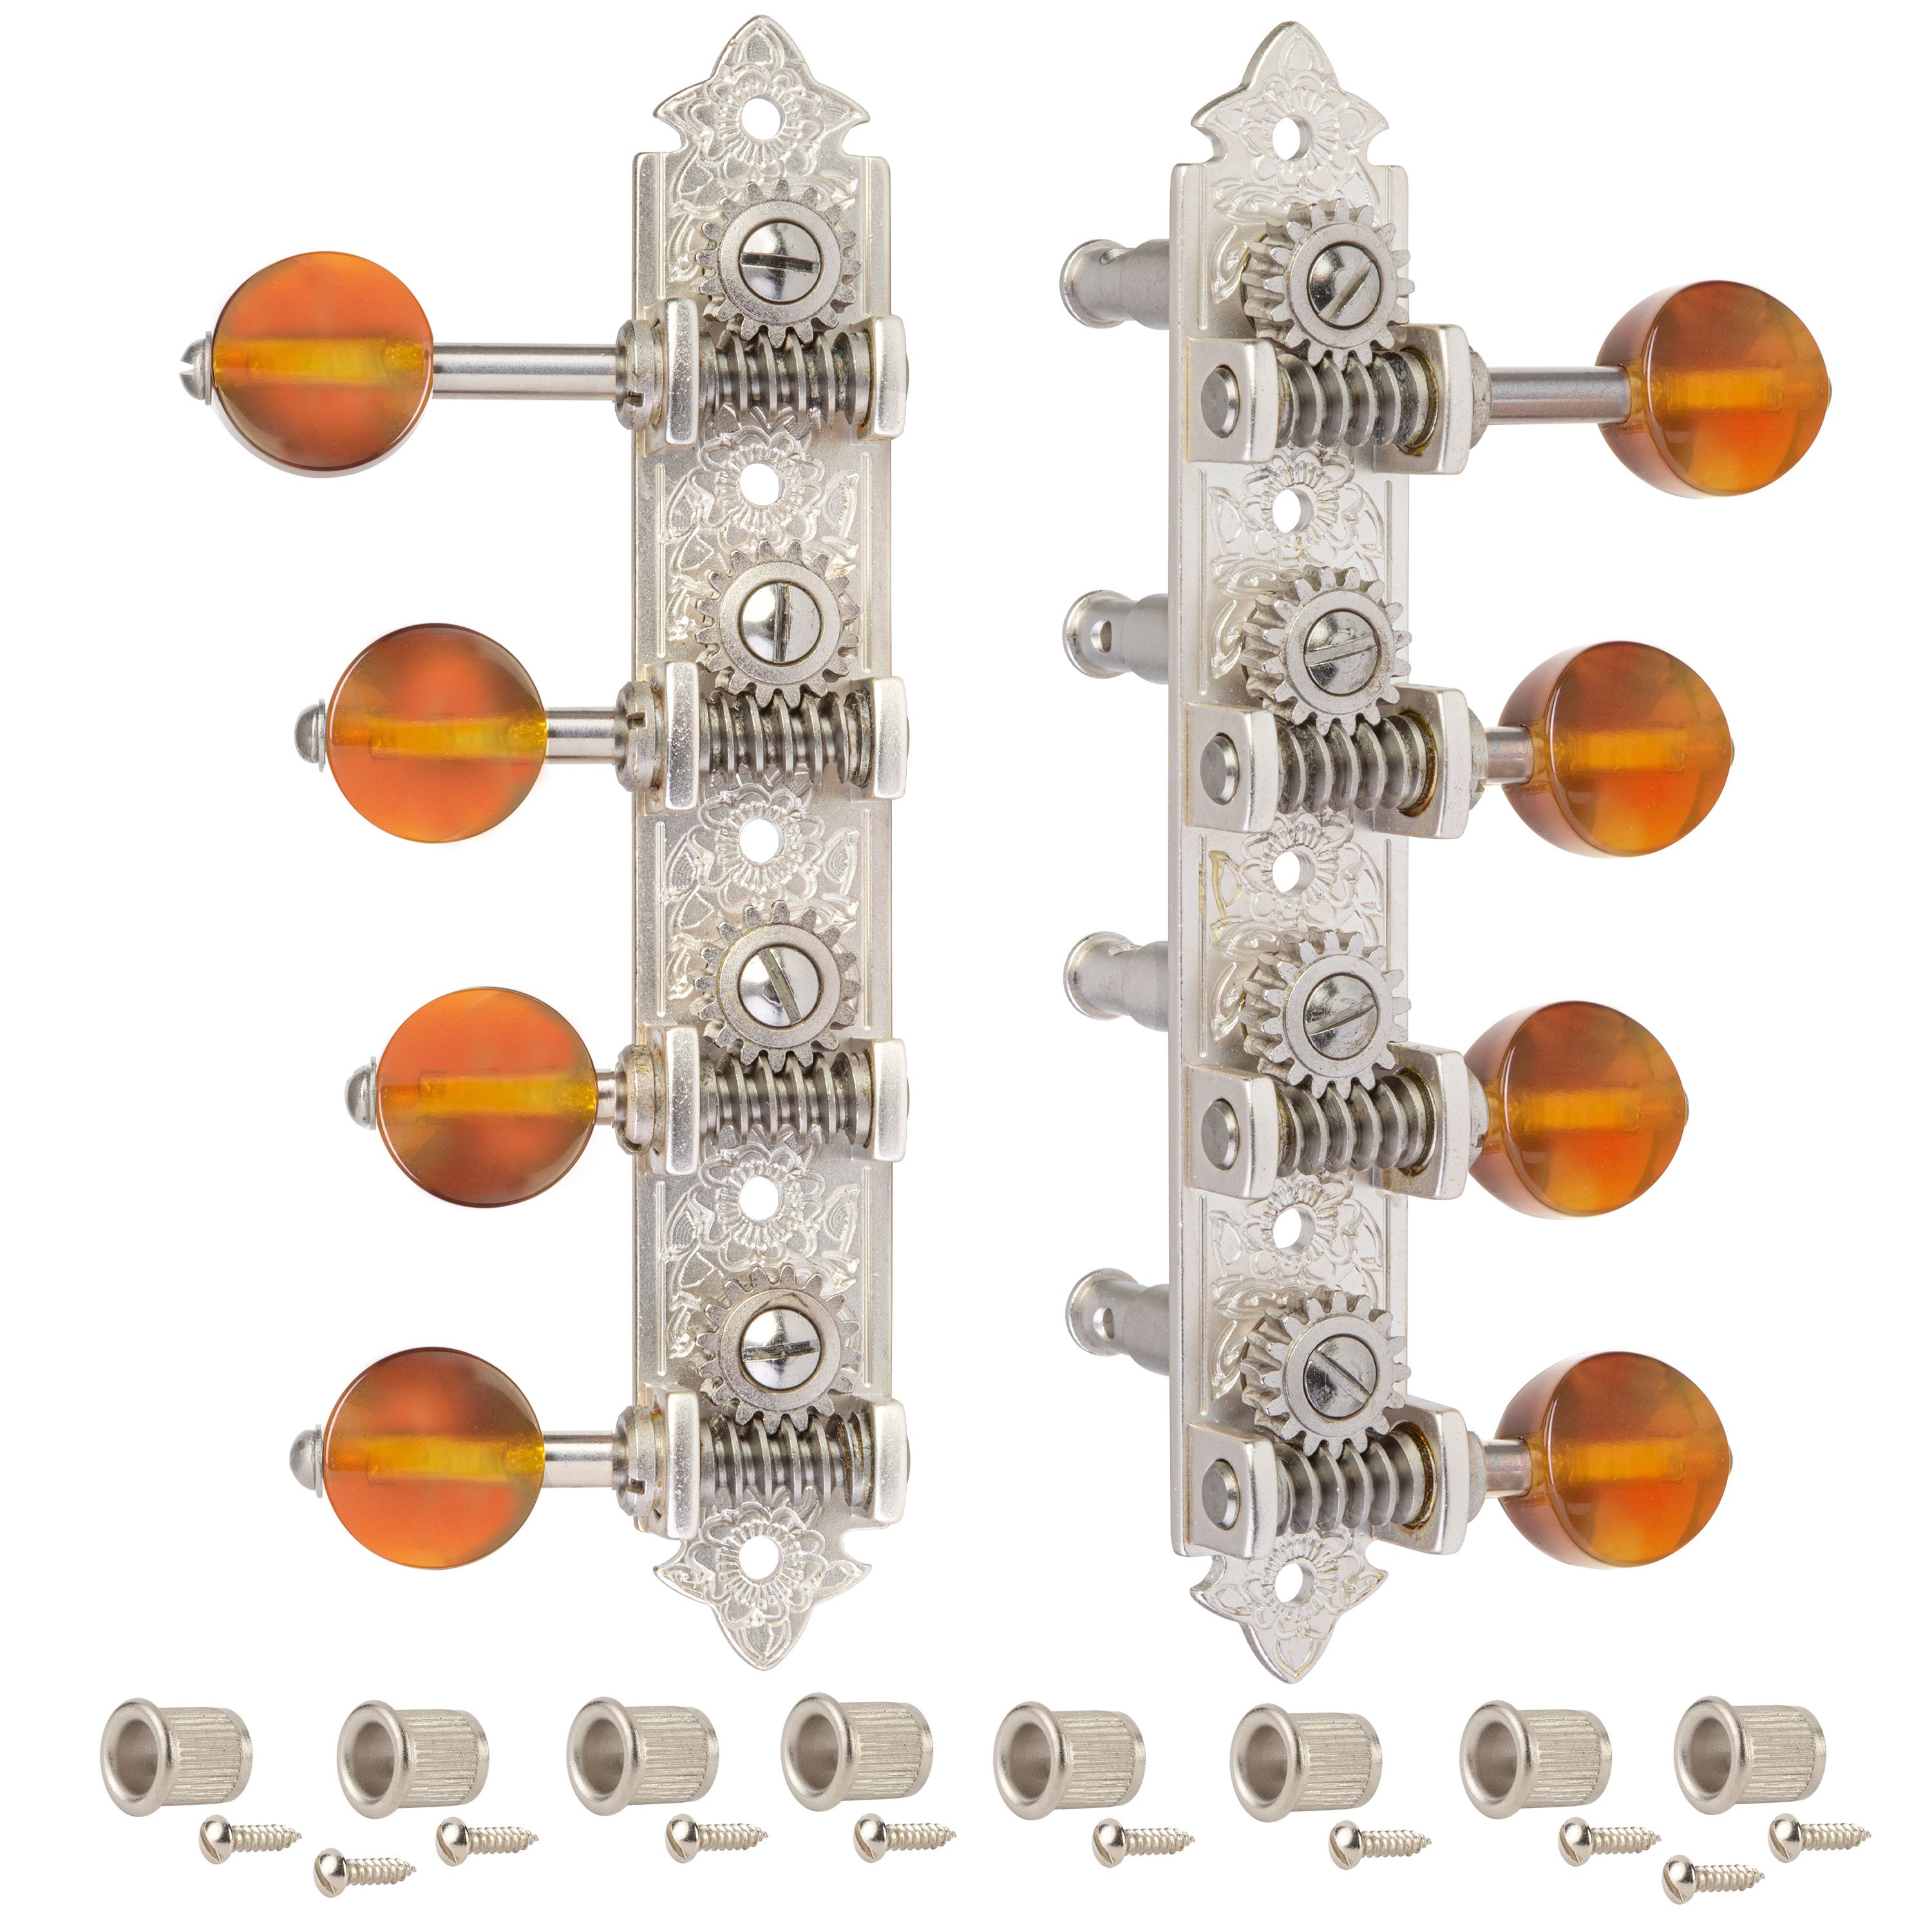 Waverly F-style Mandolin Machines with Amber Knobs